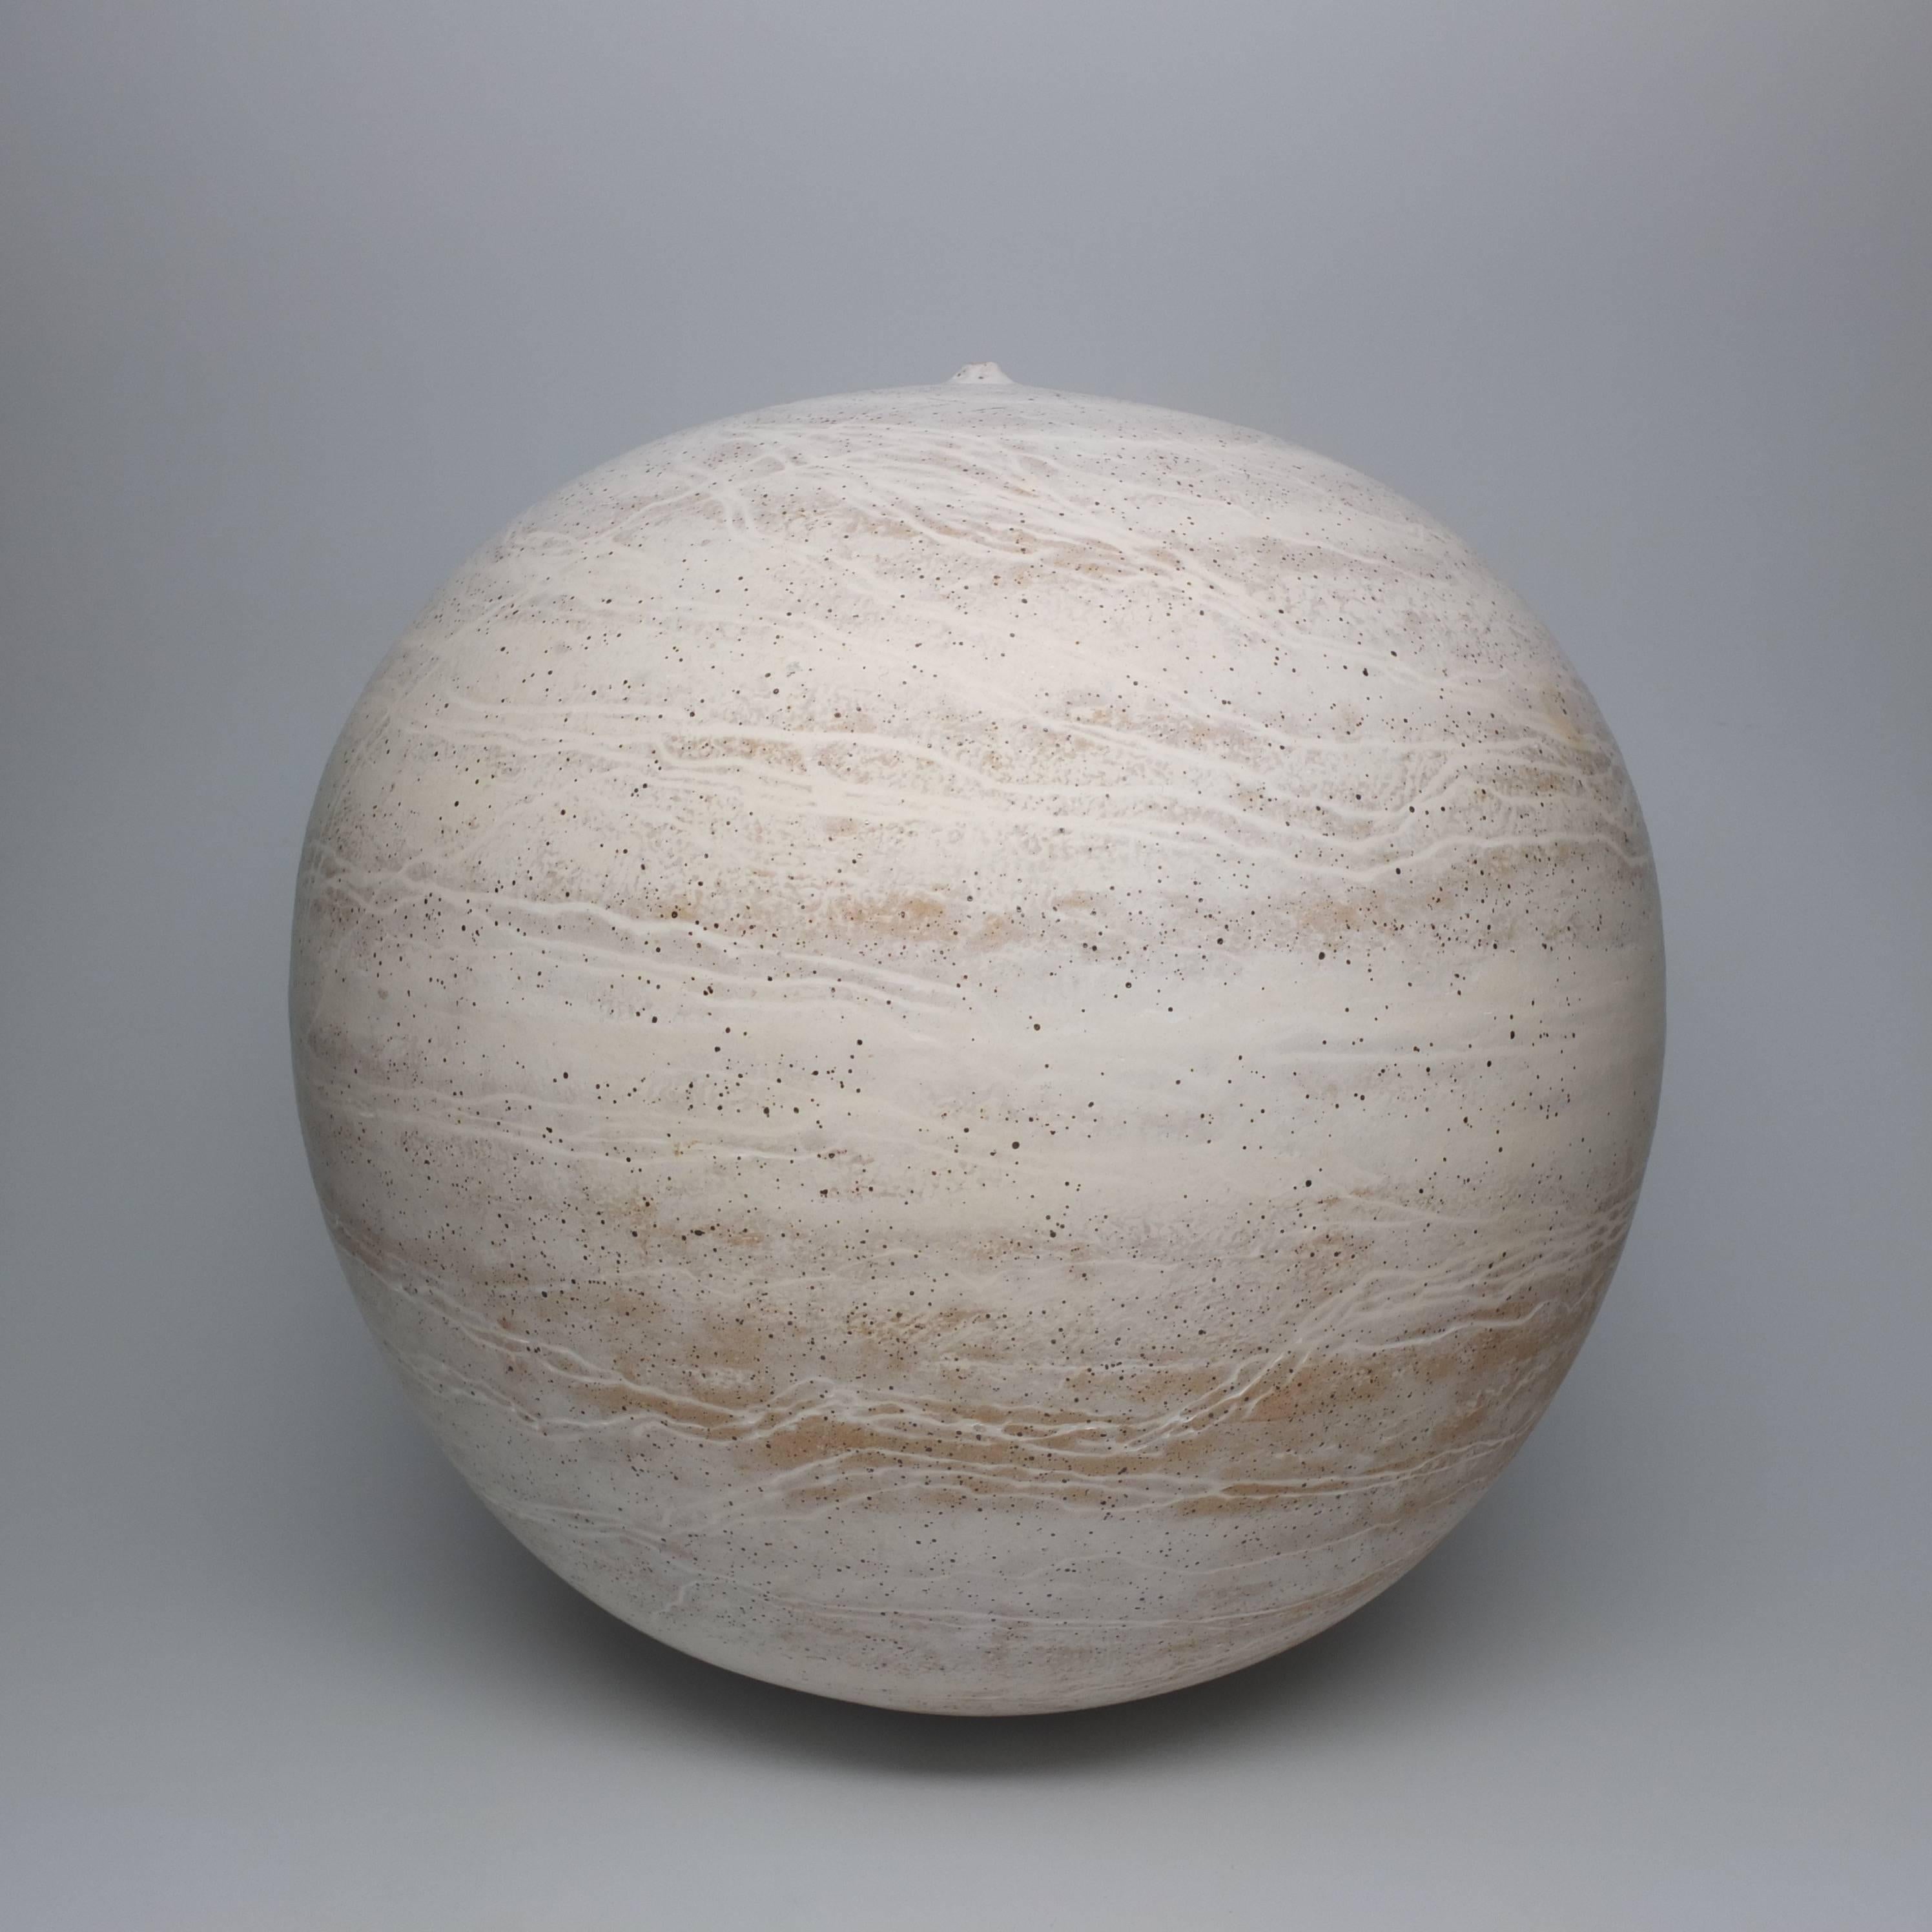 Artist bio:
New York based artist, Jeffrey Loura, creates organic, elemental vessels. Jeffrey moved to New York in 1996 to earn his BFA at Parsons School of Design, where he studied Illustration. He began throwing ceramics five years later in 2001.